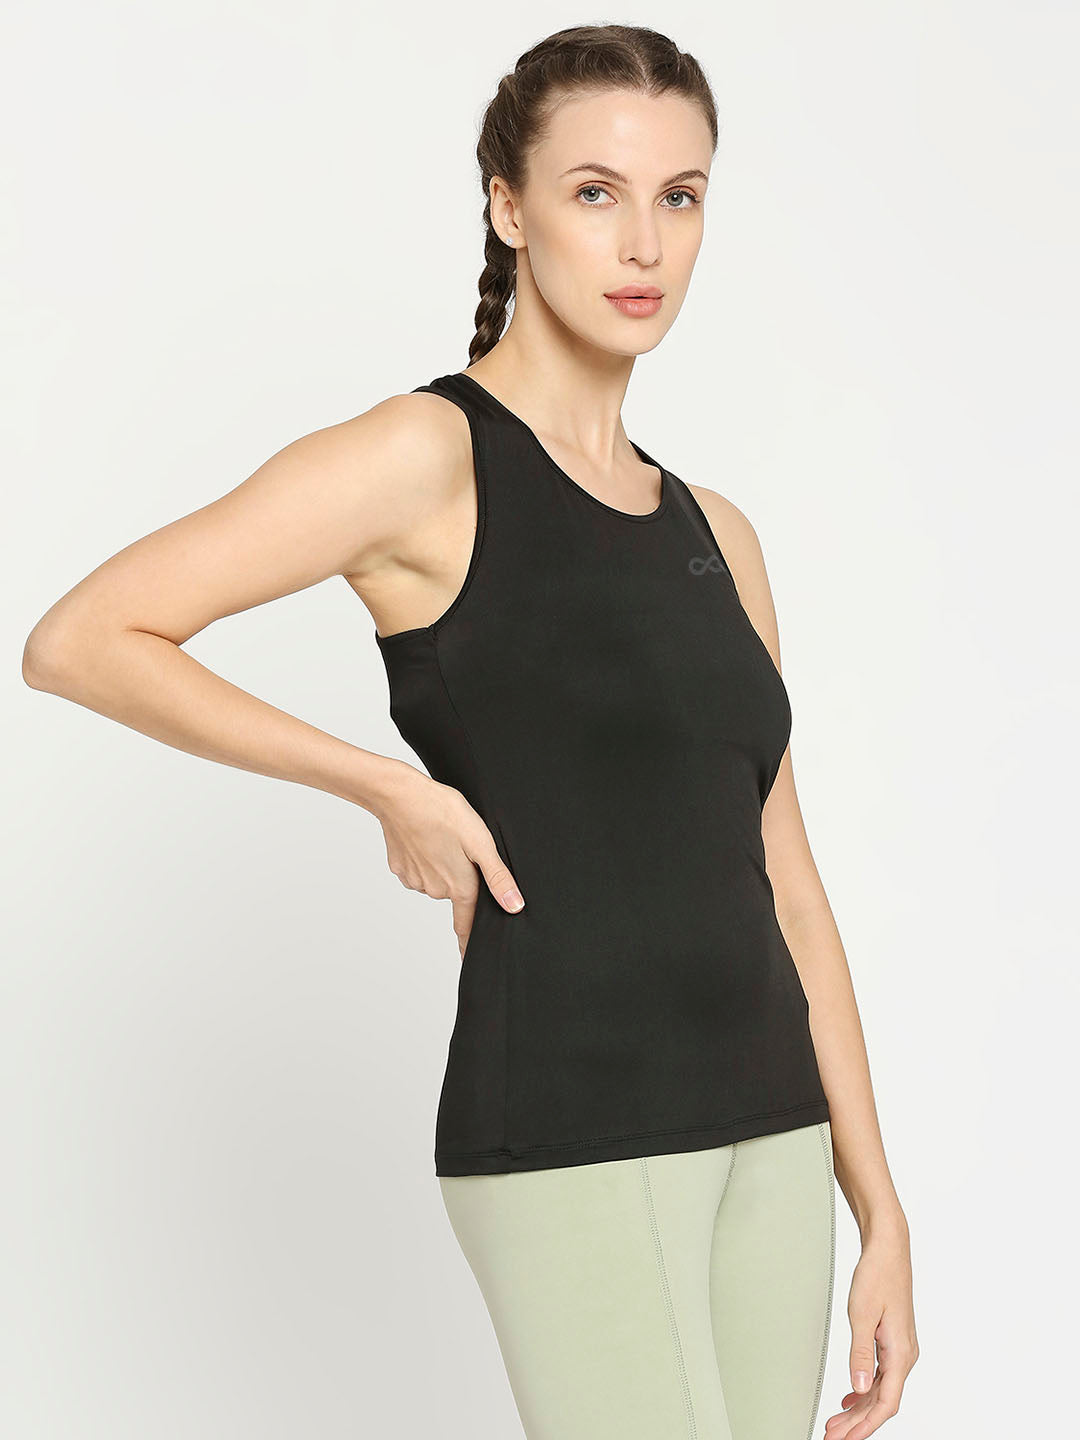 Women's Black Sports Racerback Vest - Stay Cool and Stylish